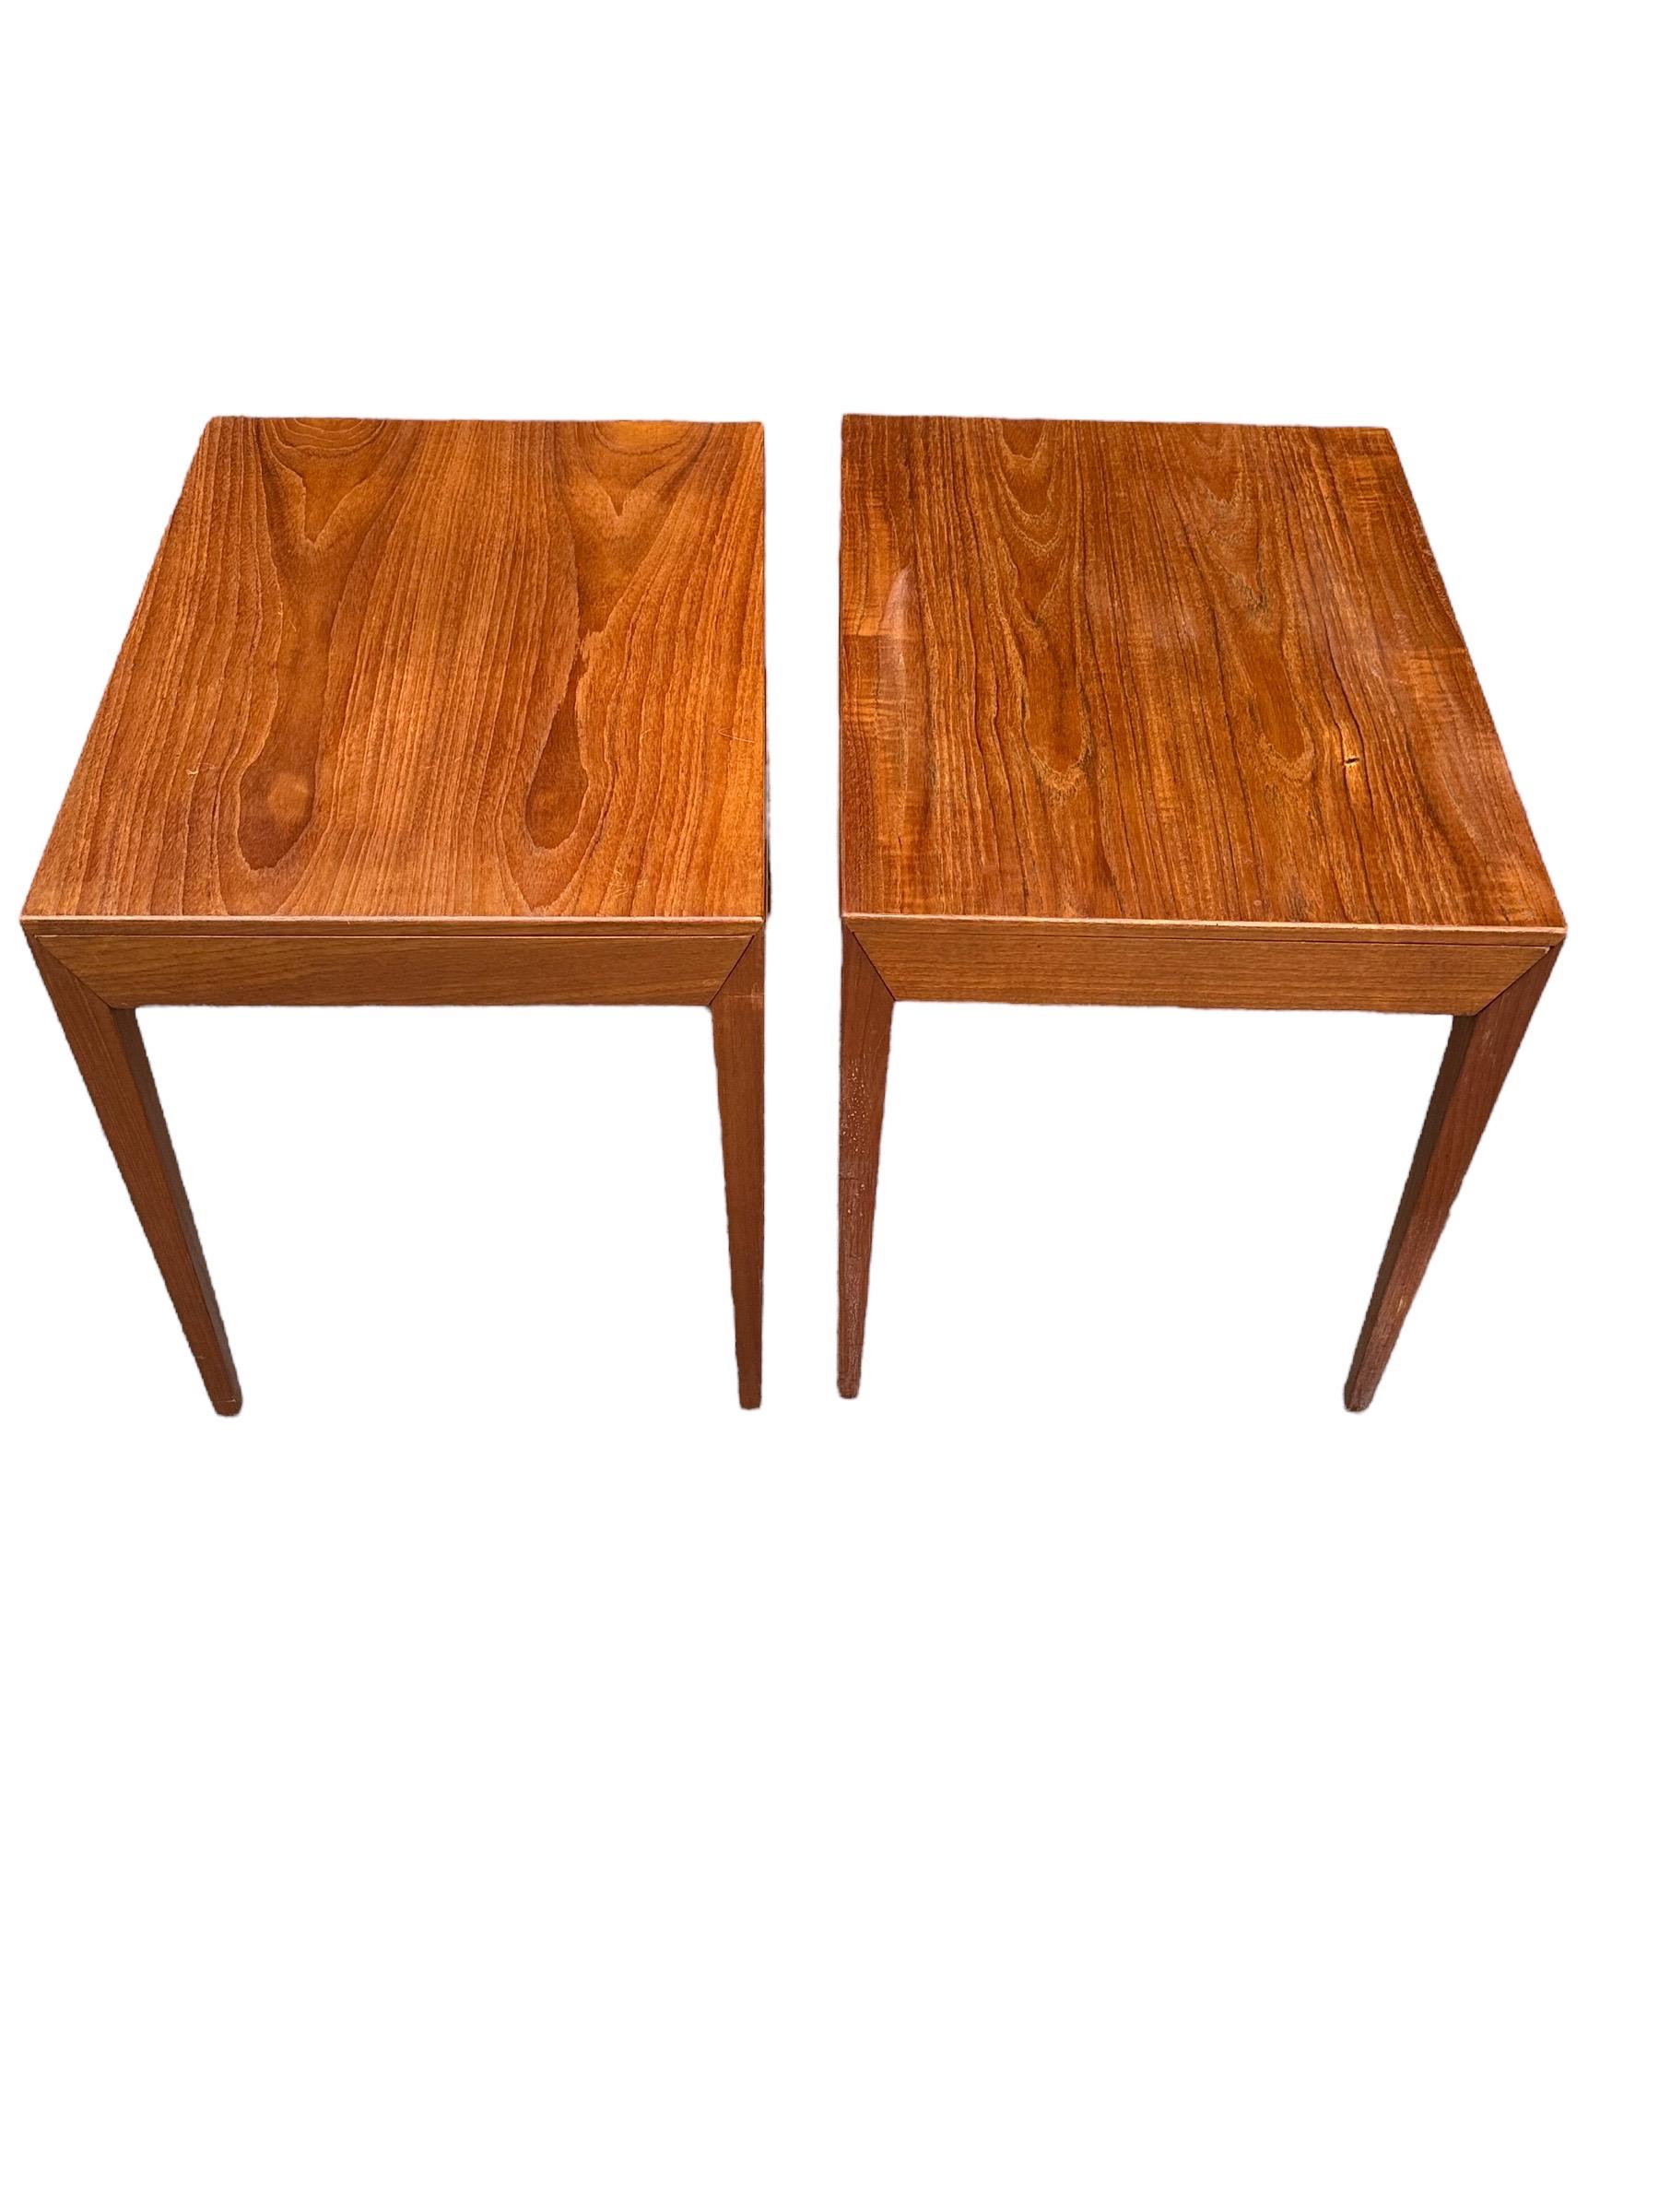 Pair of elegant teak nightstands with drawer attributed to Severin Hansen Jr for Haslev. Classic Scandinavian silhouette. The epitome of Danish design and craftsmanship. Each features a pull out drawer for storage. Large enough to support good sized